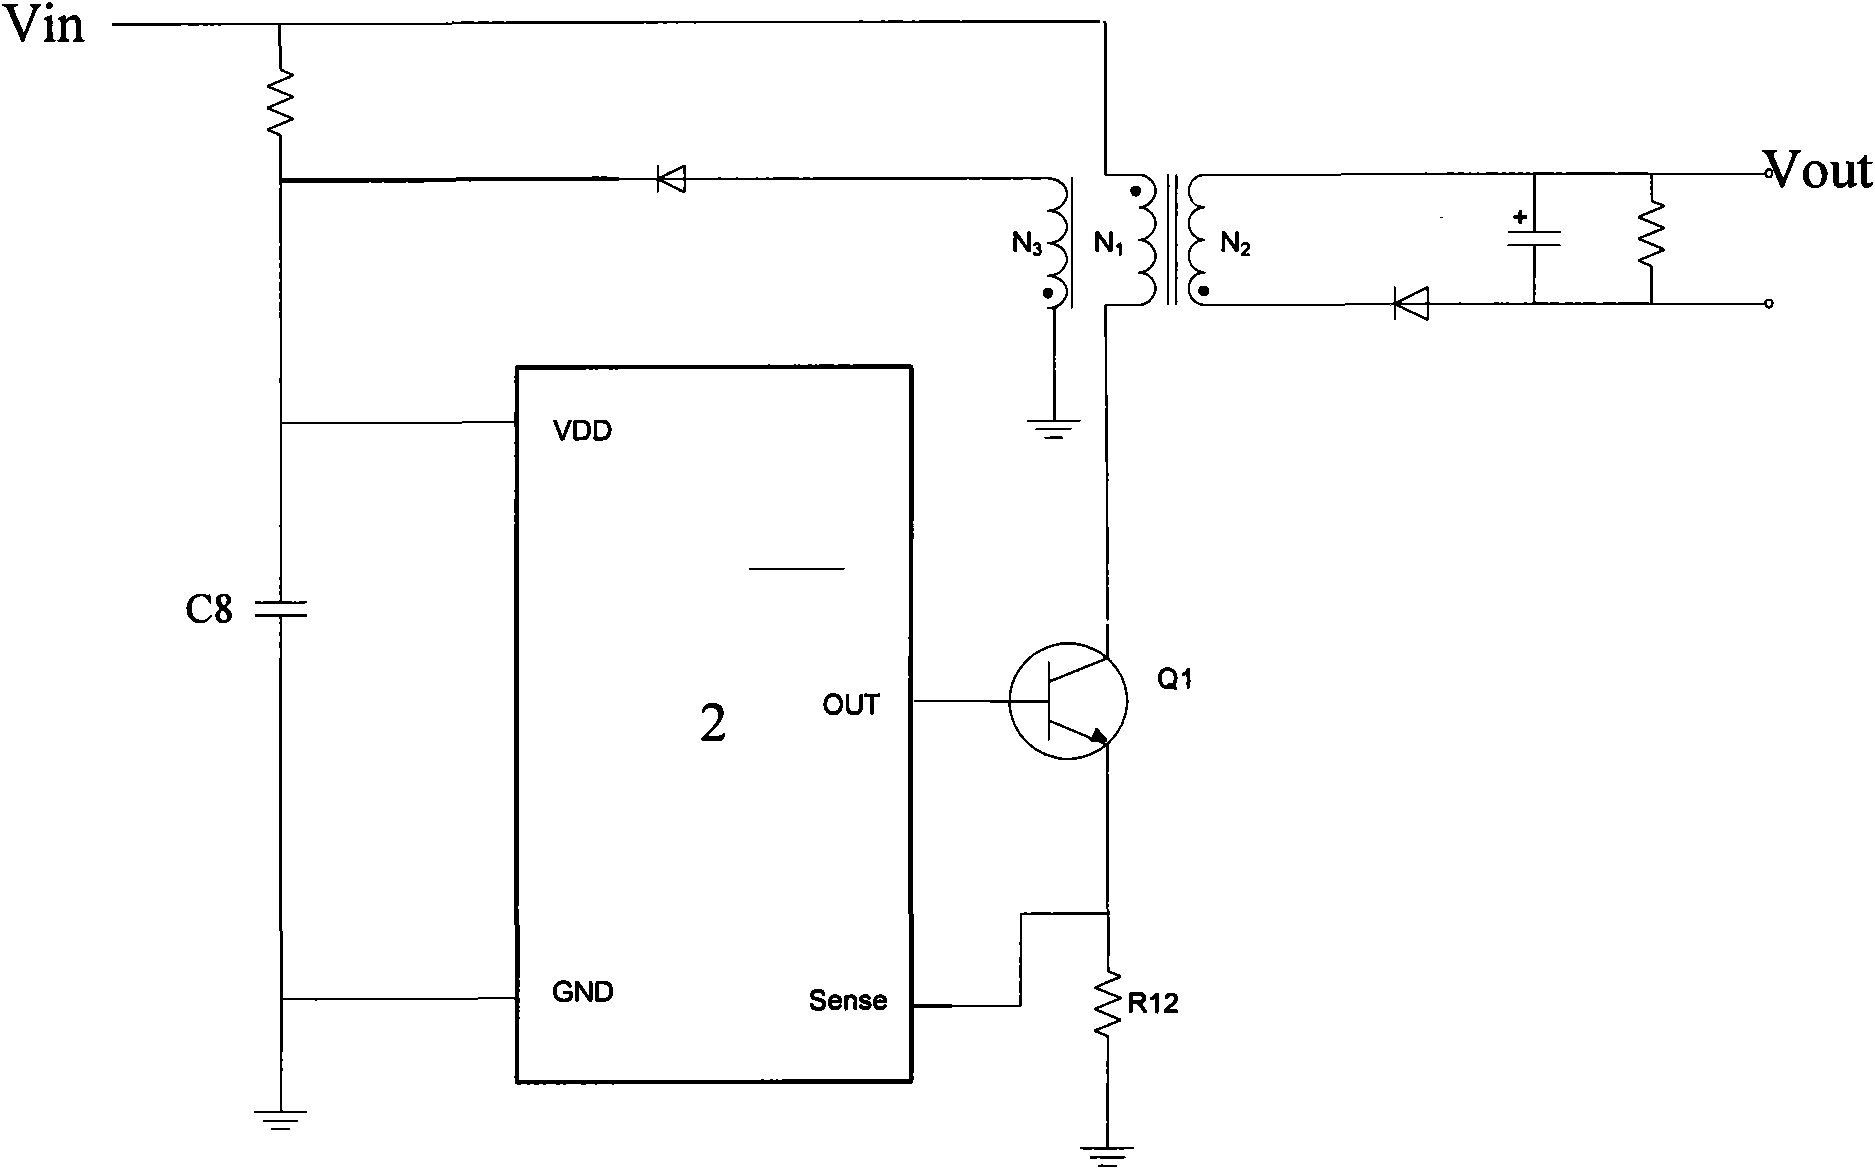 Switching mode power source